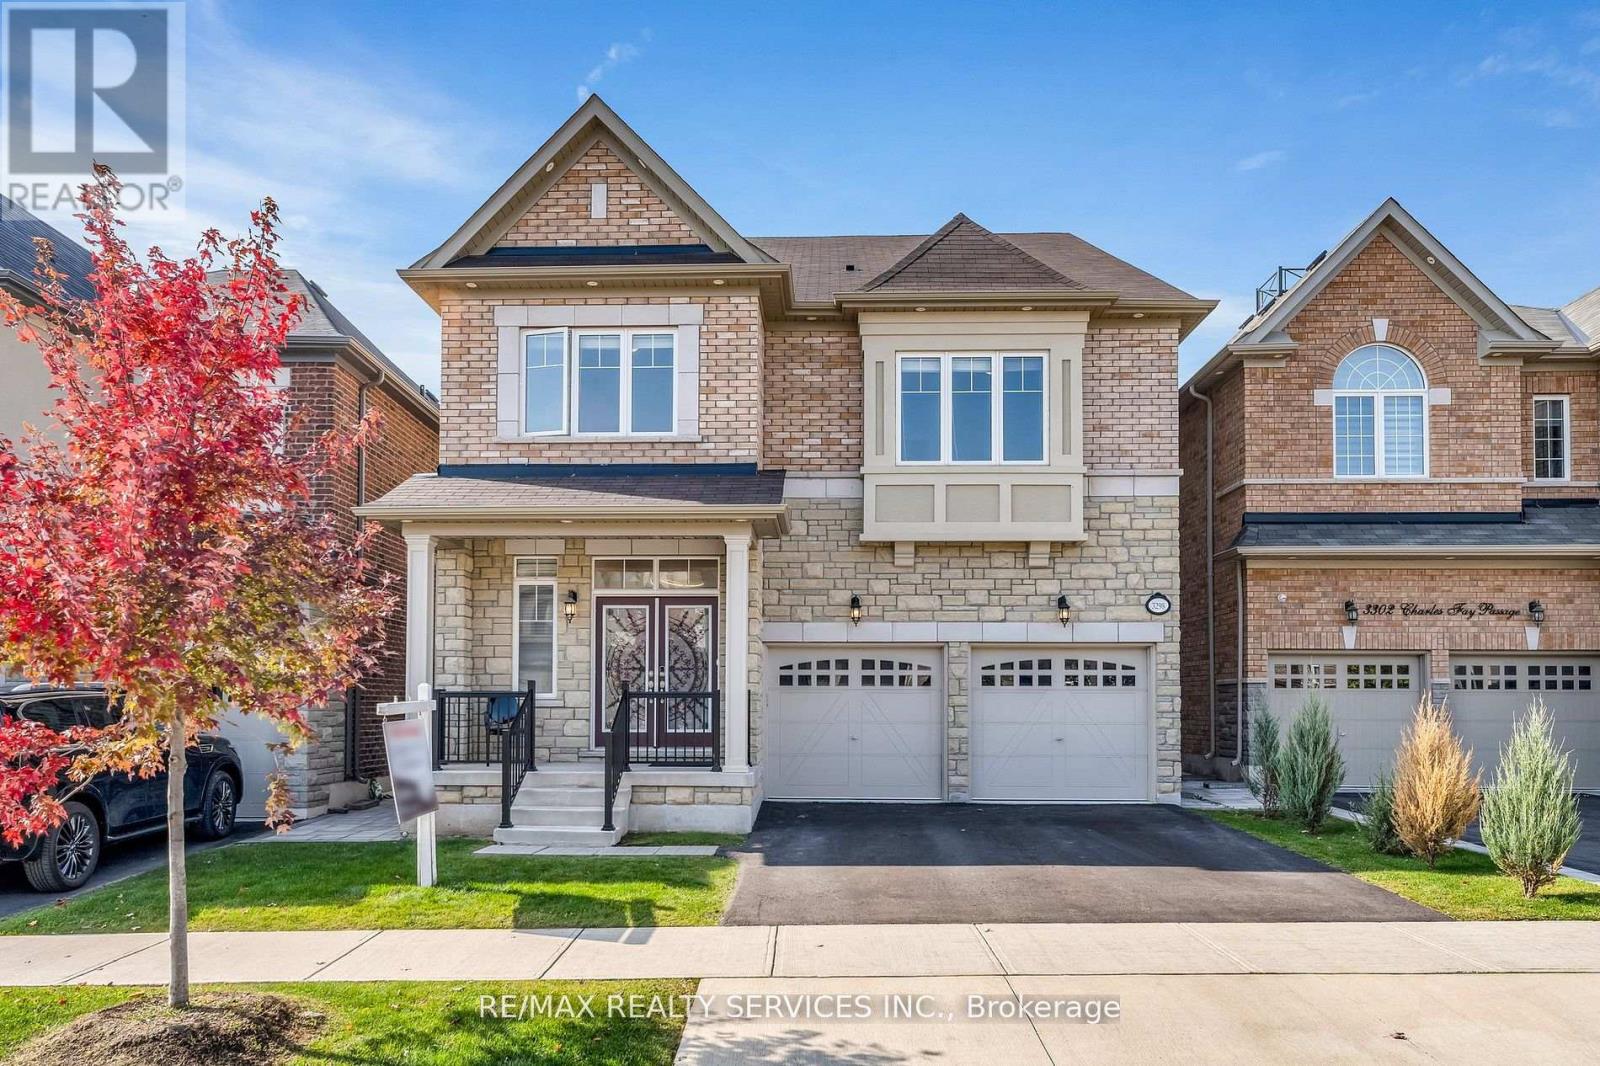 3298 Charles Fay Pass, Oakville, 4 Bedrooms Bedrooms, ,5 BathroomsBathrooms,Single Family,For Sale,Charles Fay Pass,W8240620